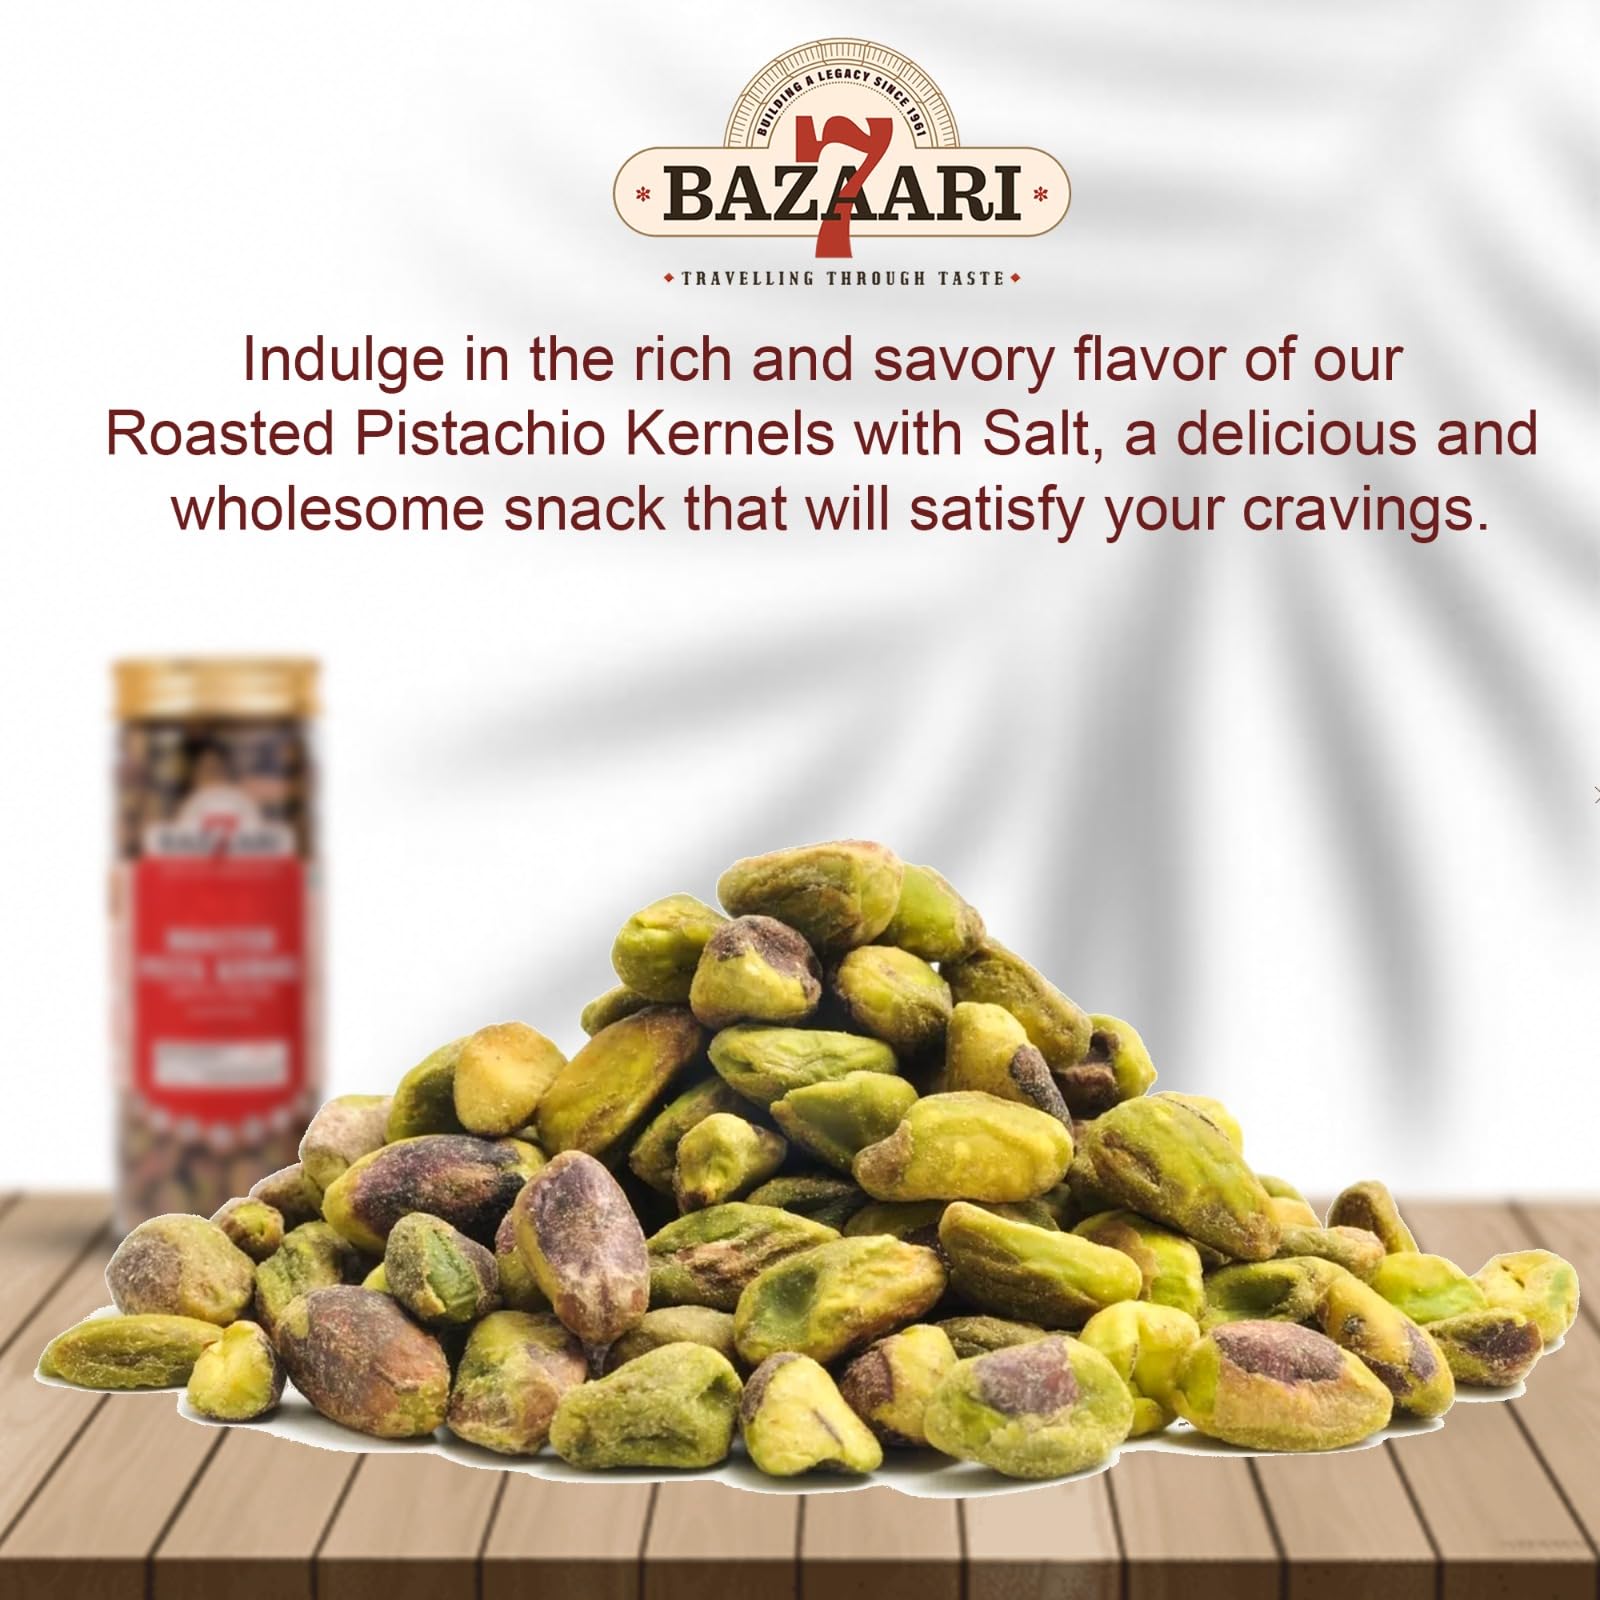 Roasted Pistachio  No Shell Lightly Salted 155g